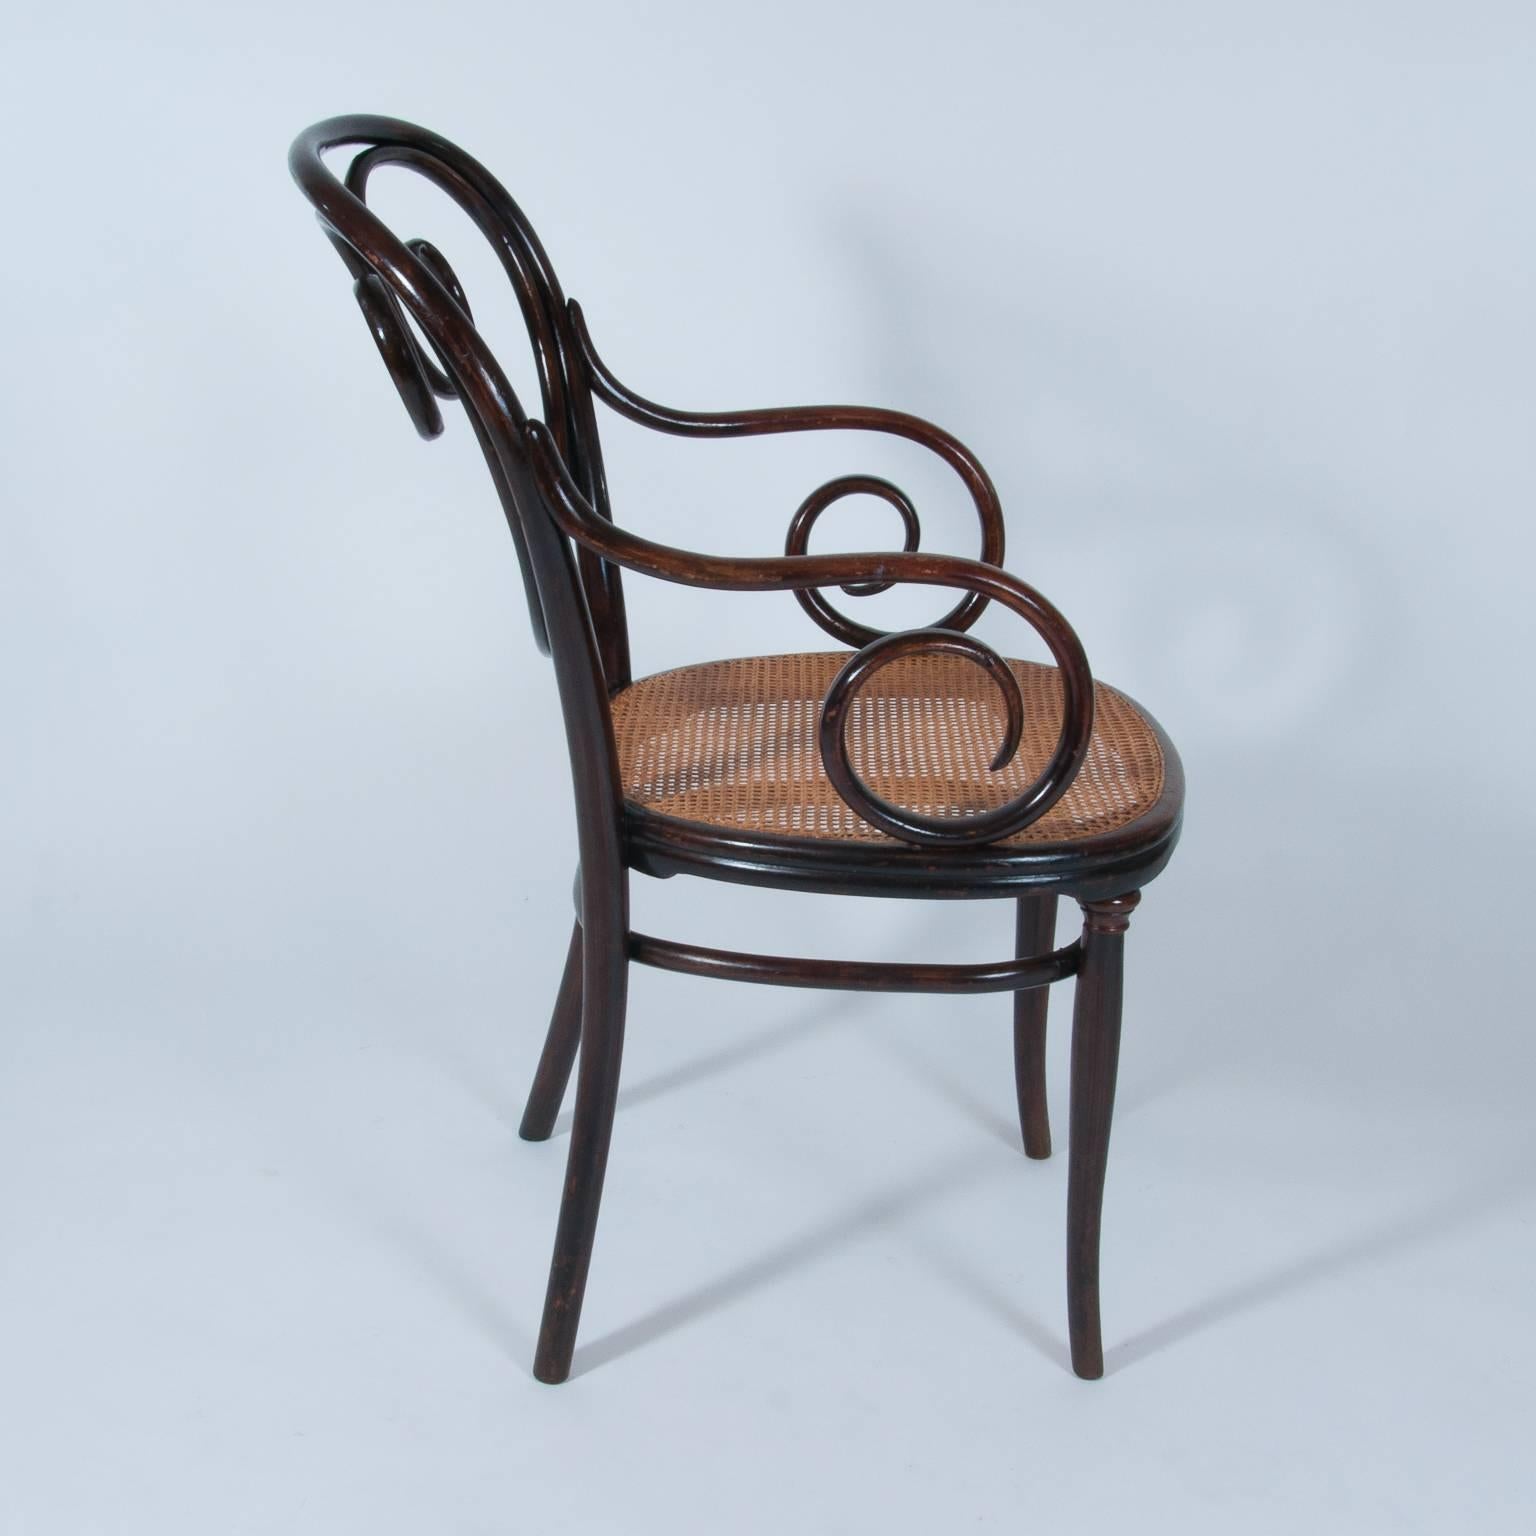 Antique Thonet Bentwood Armchair Fauteuil No. 2, designed 1865, manufactured 1895.
An extraordinary piece of furniture; Armchair, show piece, side chair or even dining chair.
Very majestic.
One of very the hard to find Thonet model no. 2.
In